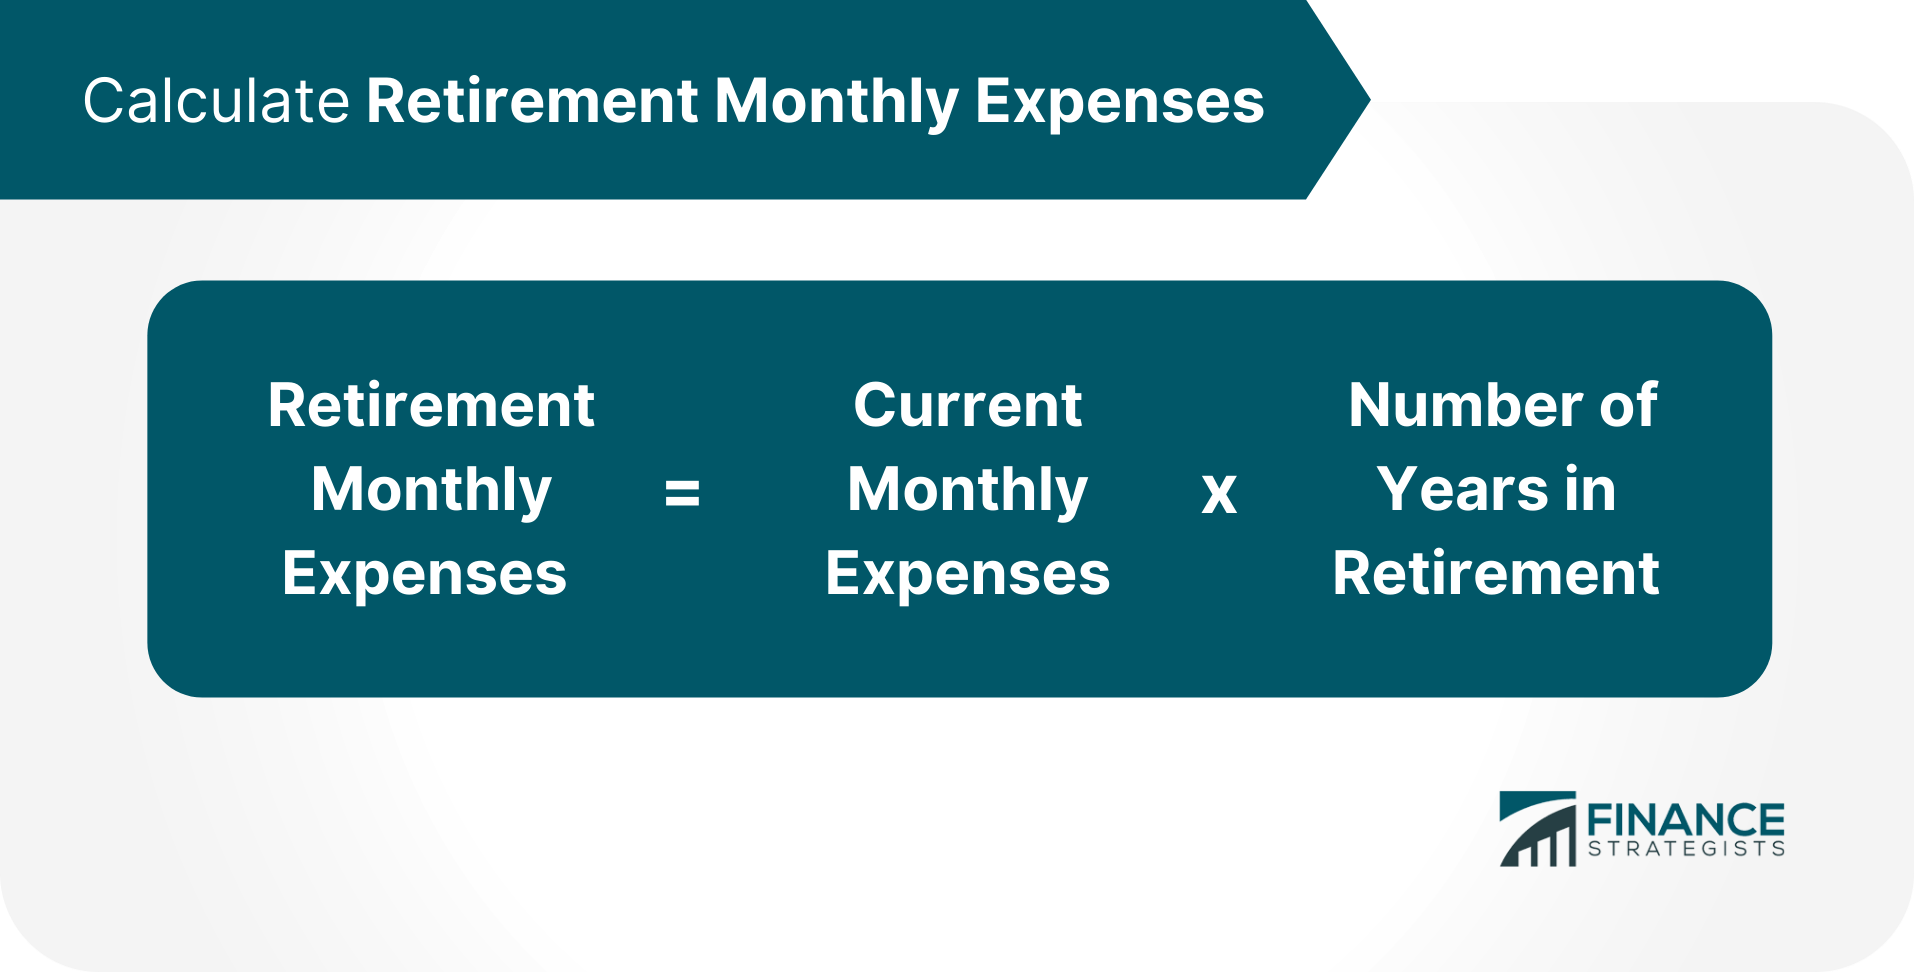 Calculate_Retirement_Monthly_Expenses